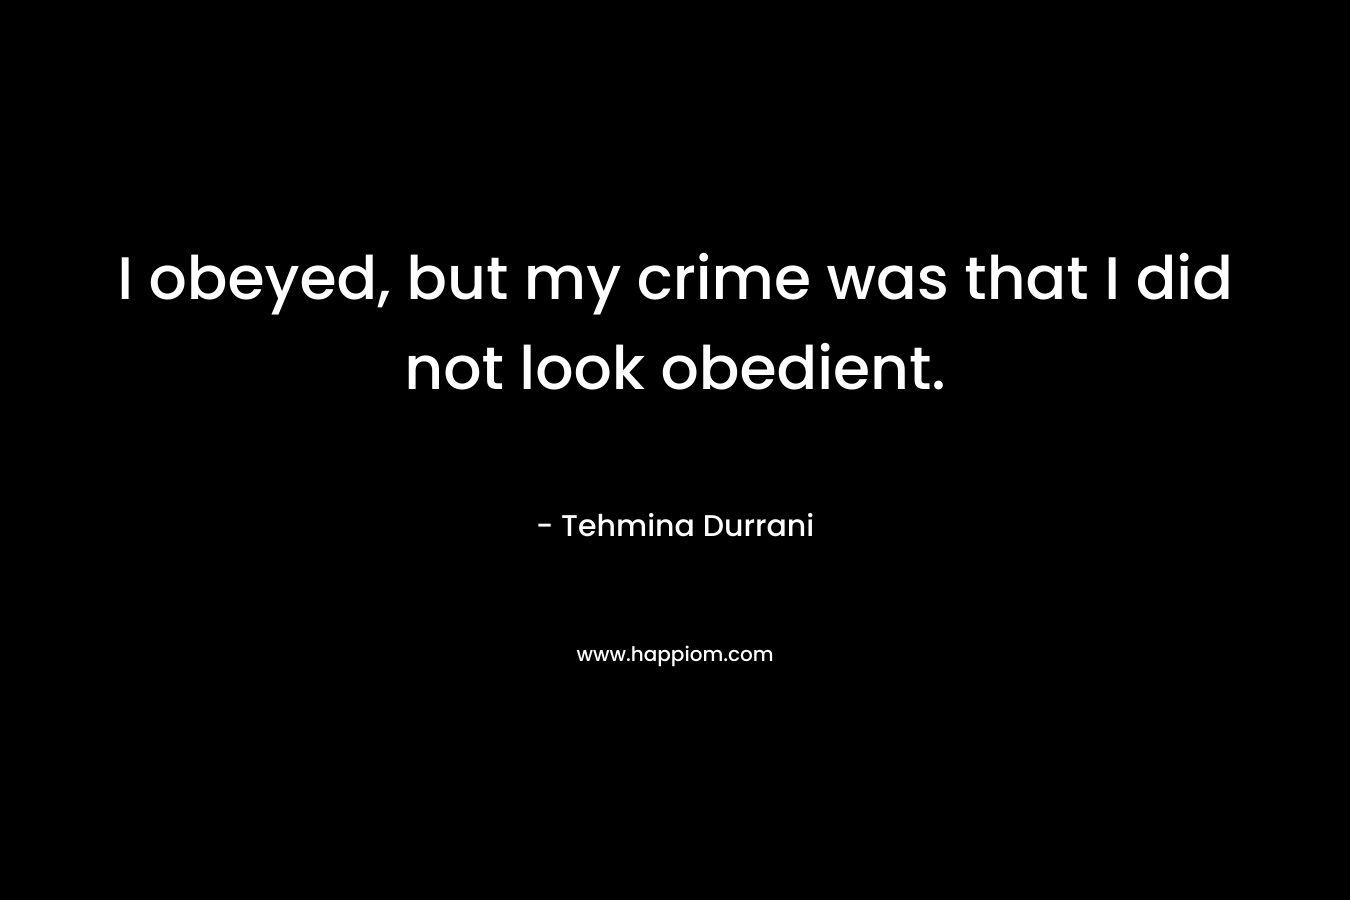 I obeyed, but my crime was that I did not look obedient. – Tehmina Durrani